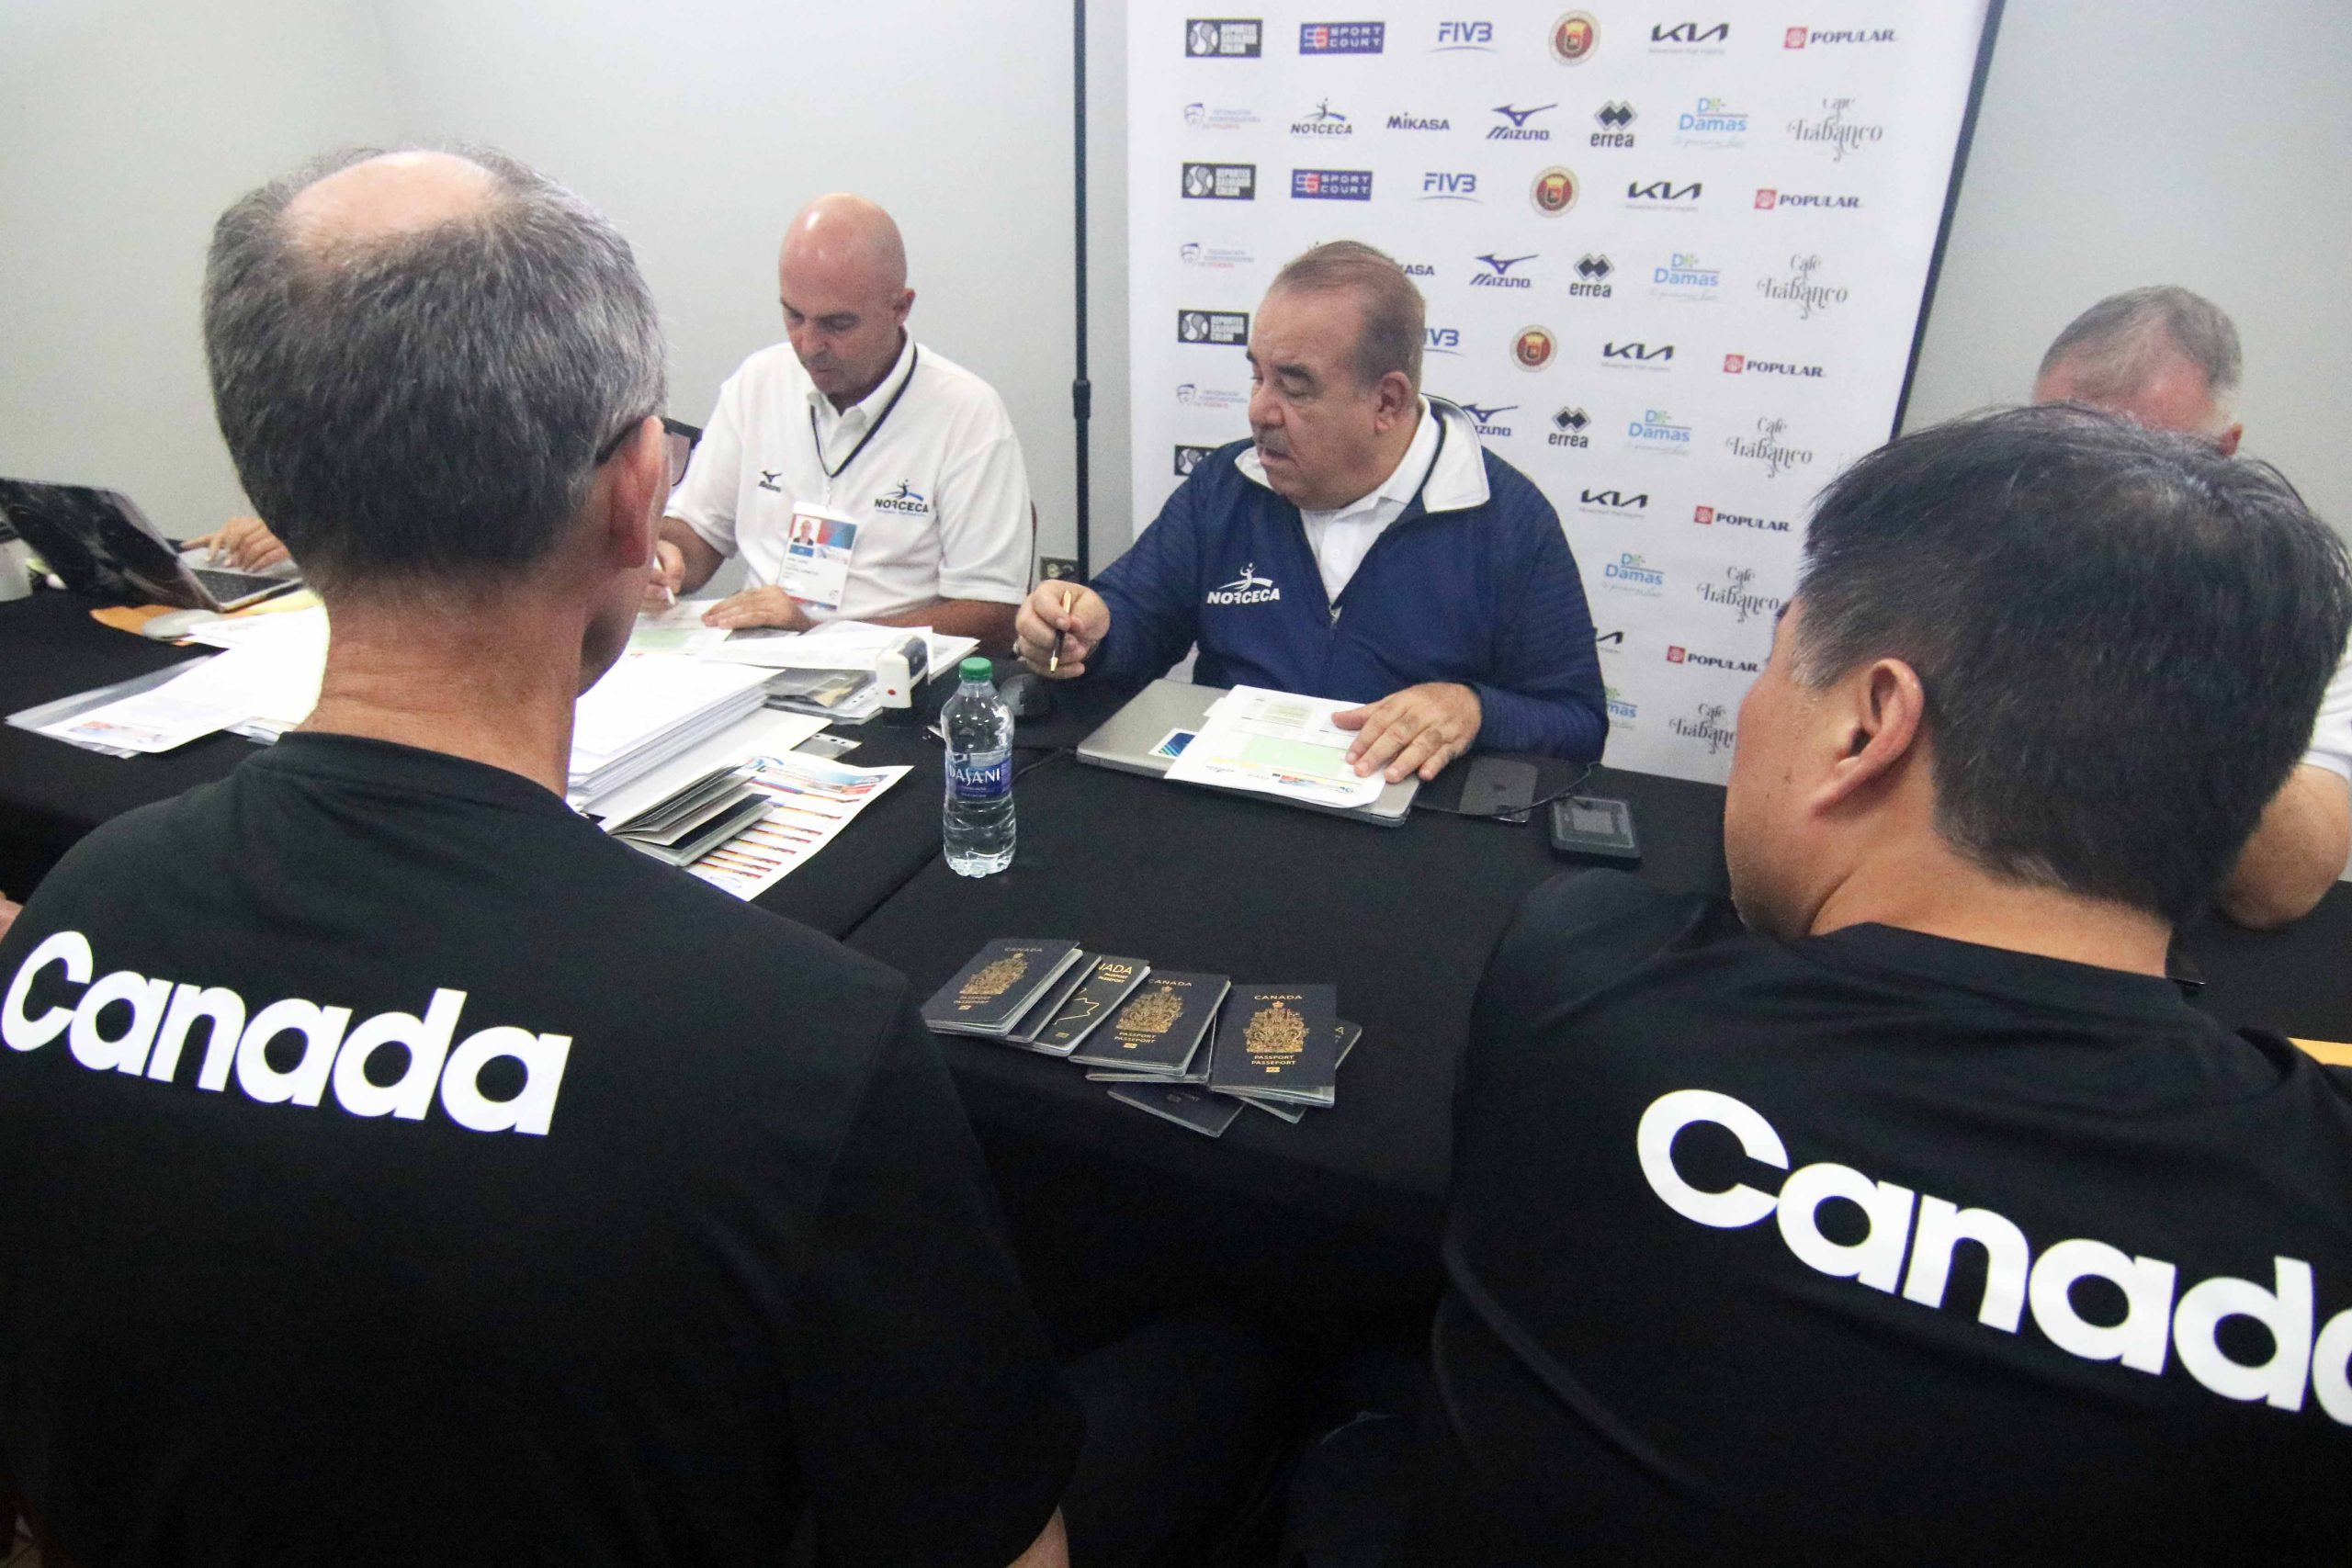 Coaches affirm their teams are enthusiastic for the Boys’ U19 NORCECA  Title